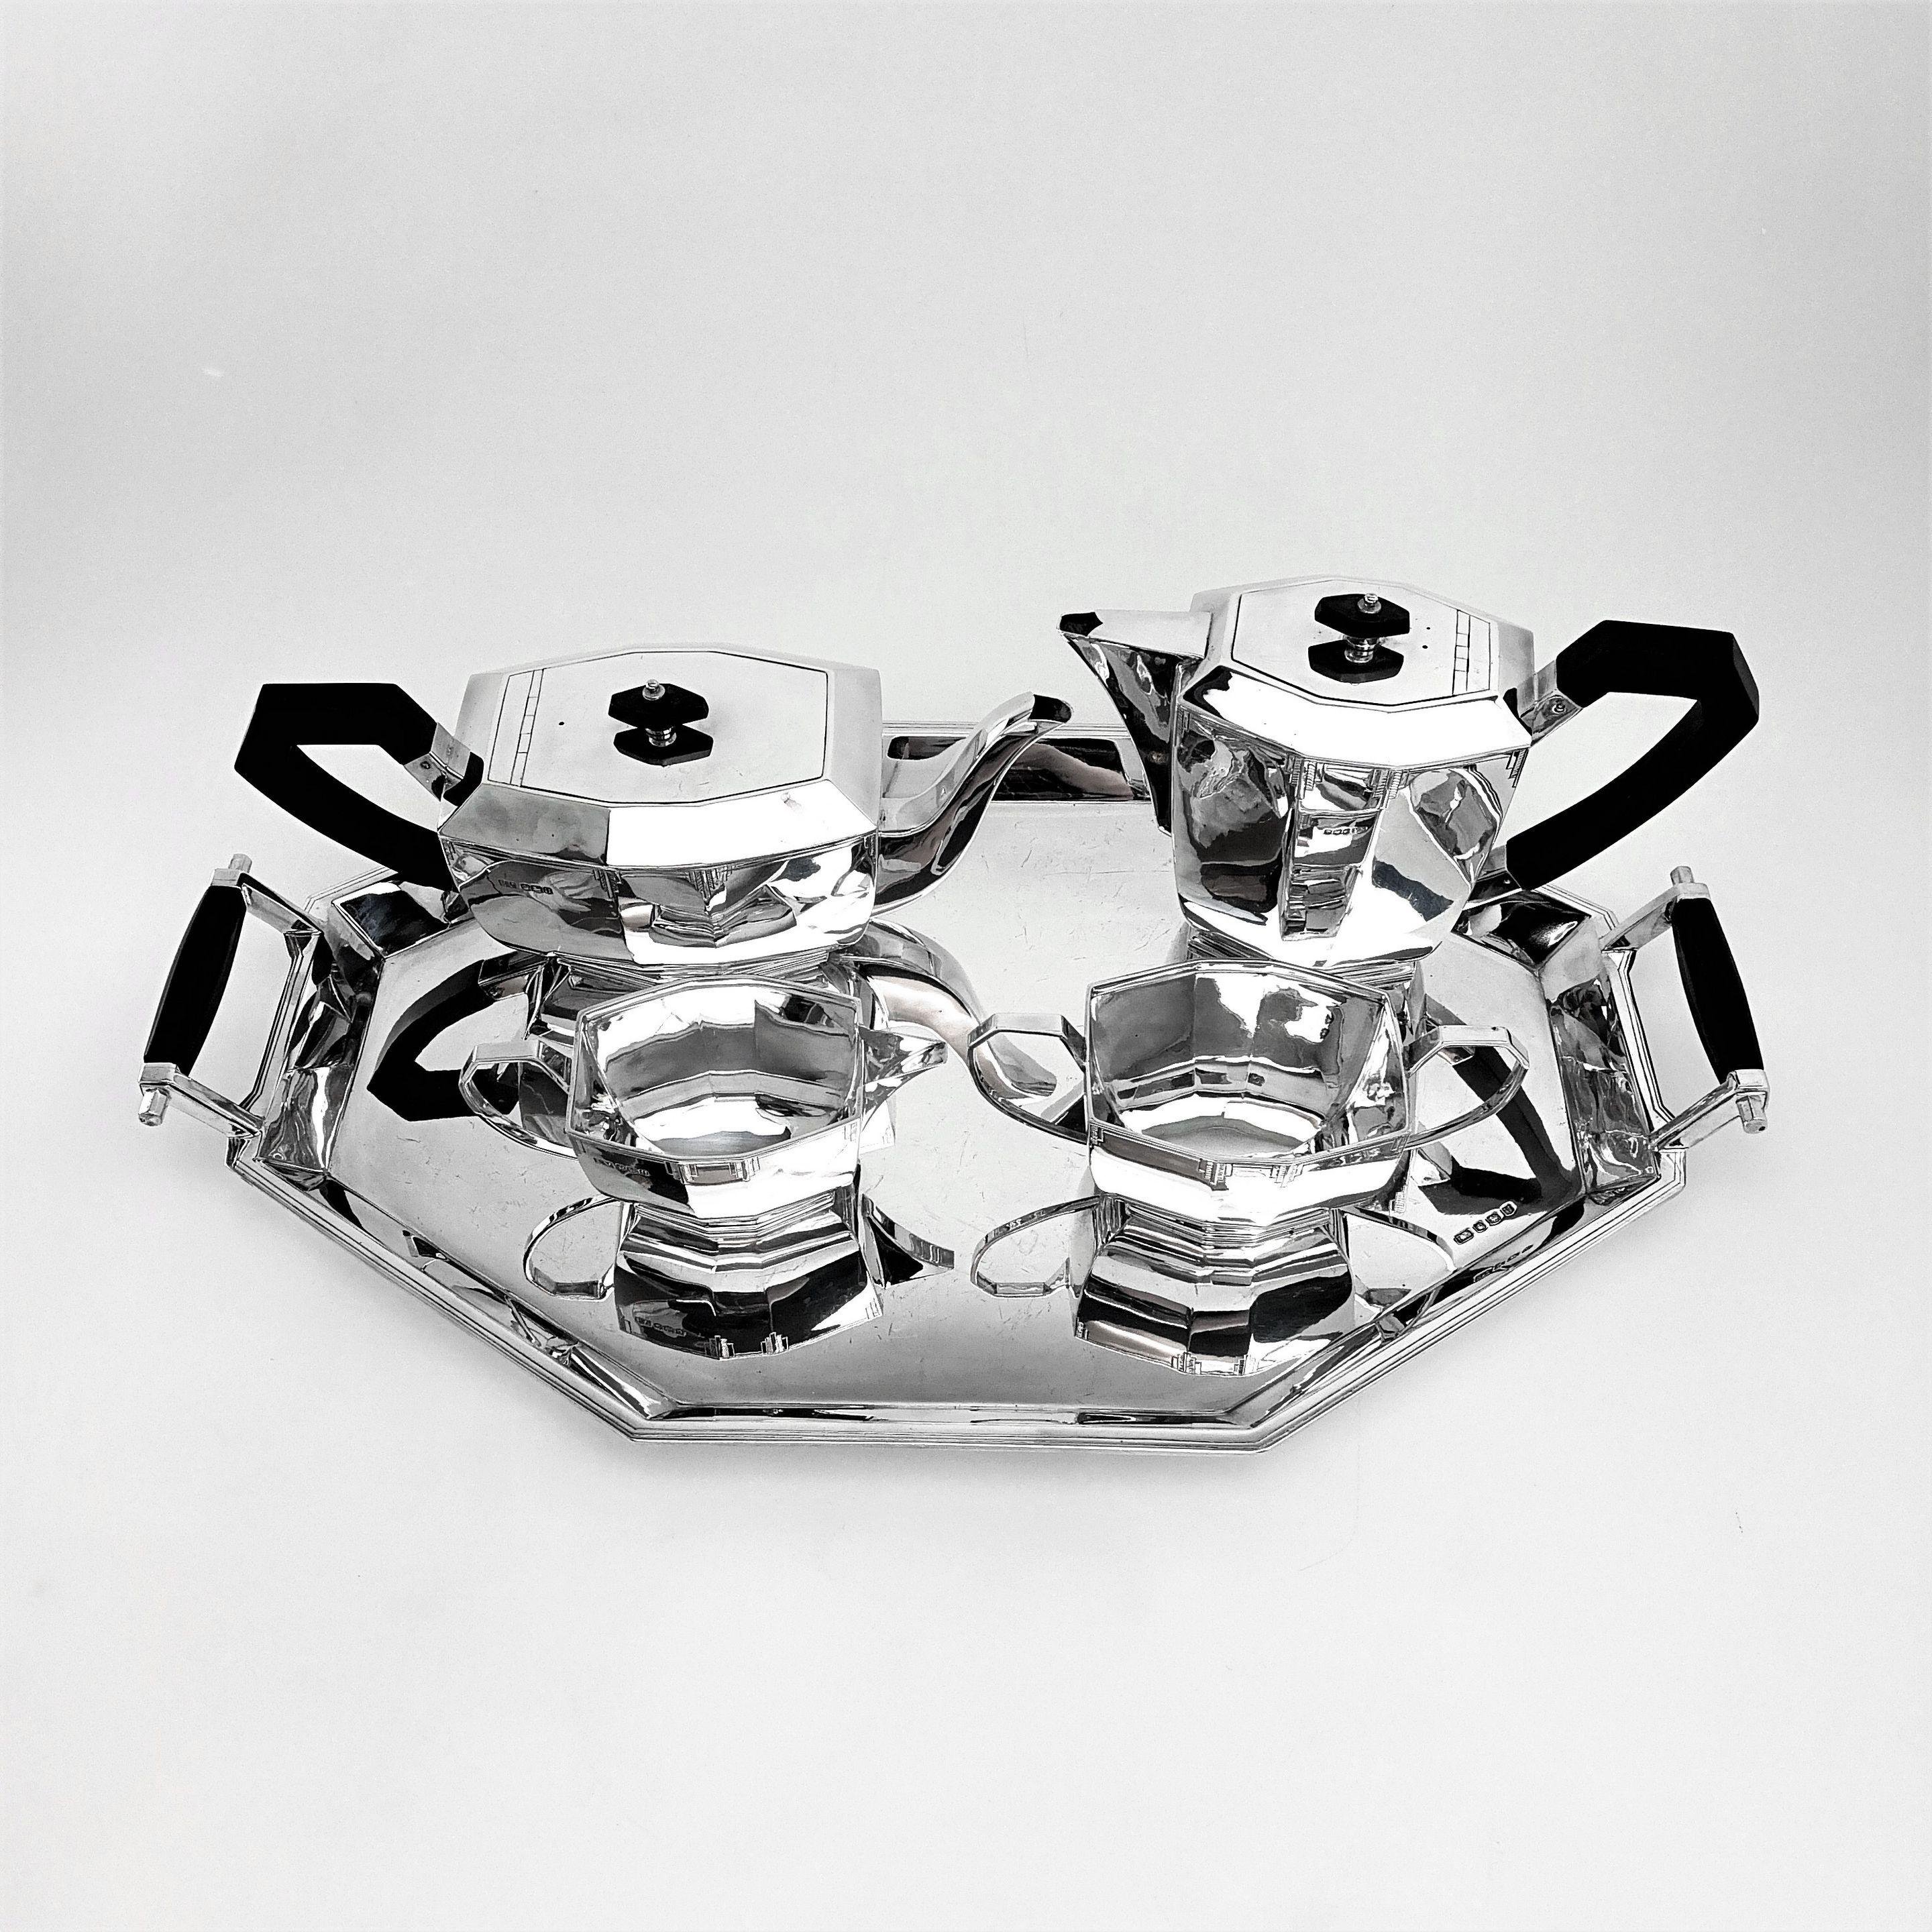 A gorgeous solid silver Art Deco tea set on tray. This Classic set is made in a style typical of early Art Deco period designs. Each piece of the tea and coffee set has a panelled octagonal shape and are embellished with a sublte geometric engraved